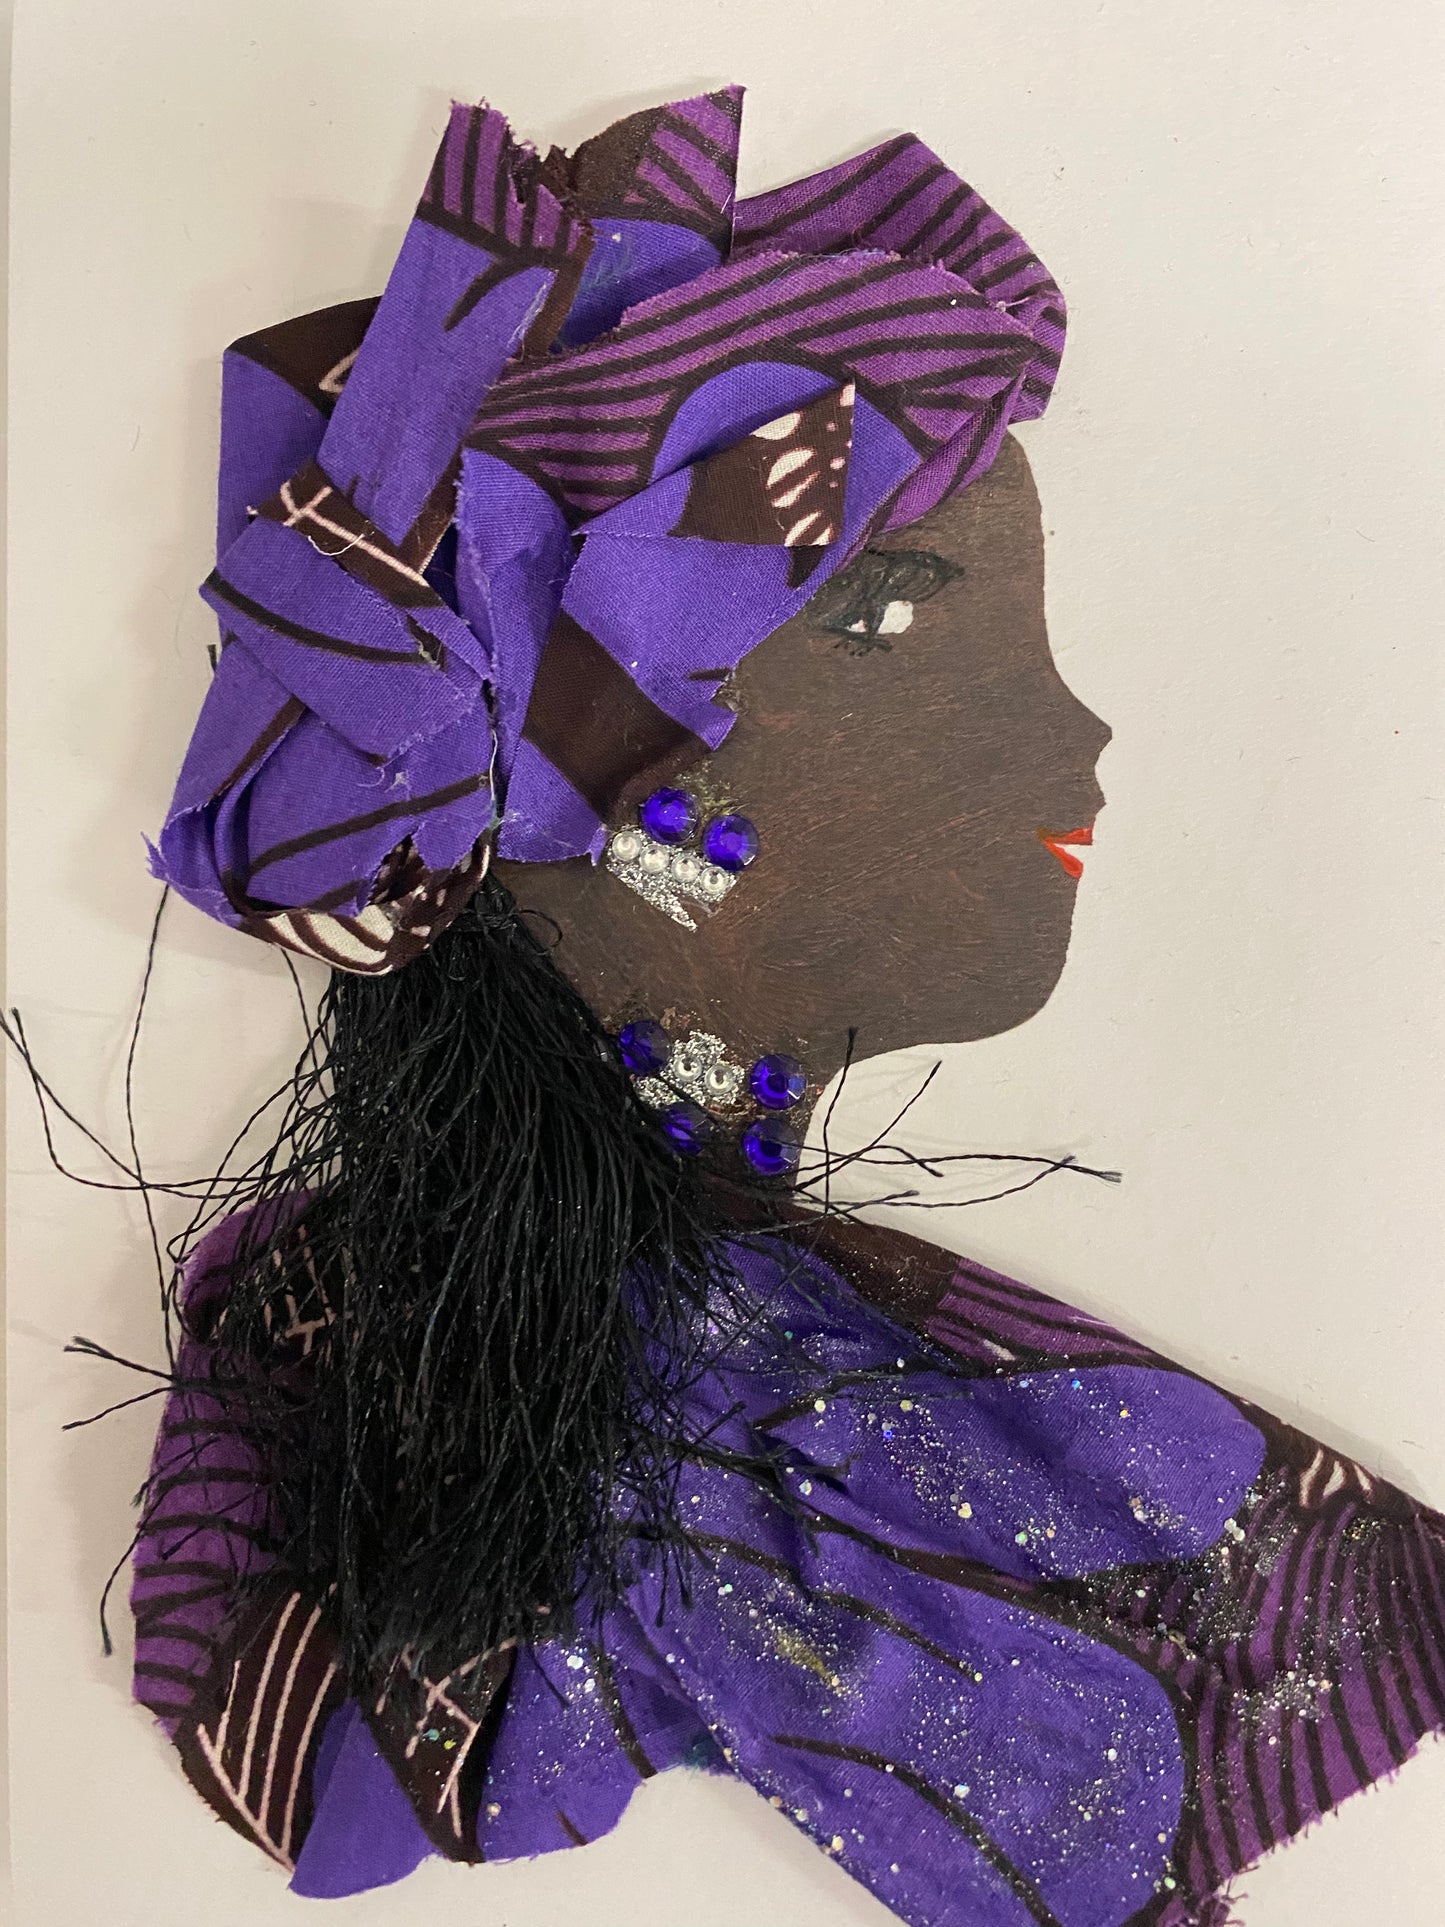 I designed this card of a woman who is wearing pattern hat filled with multiple shades of purple. She is wearing a pattern blouse that also has multiple shades of purple. She wears darling silver jewellery. 